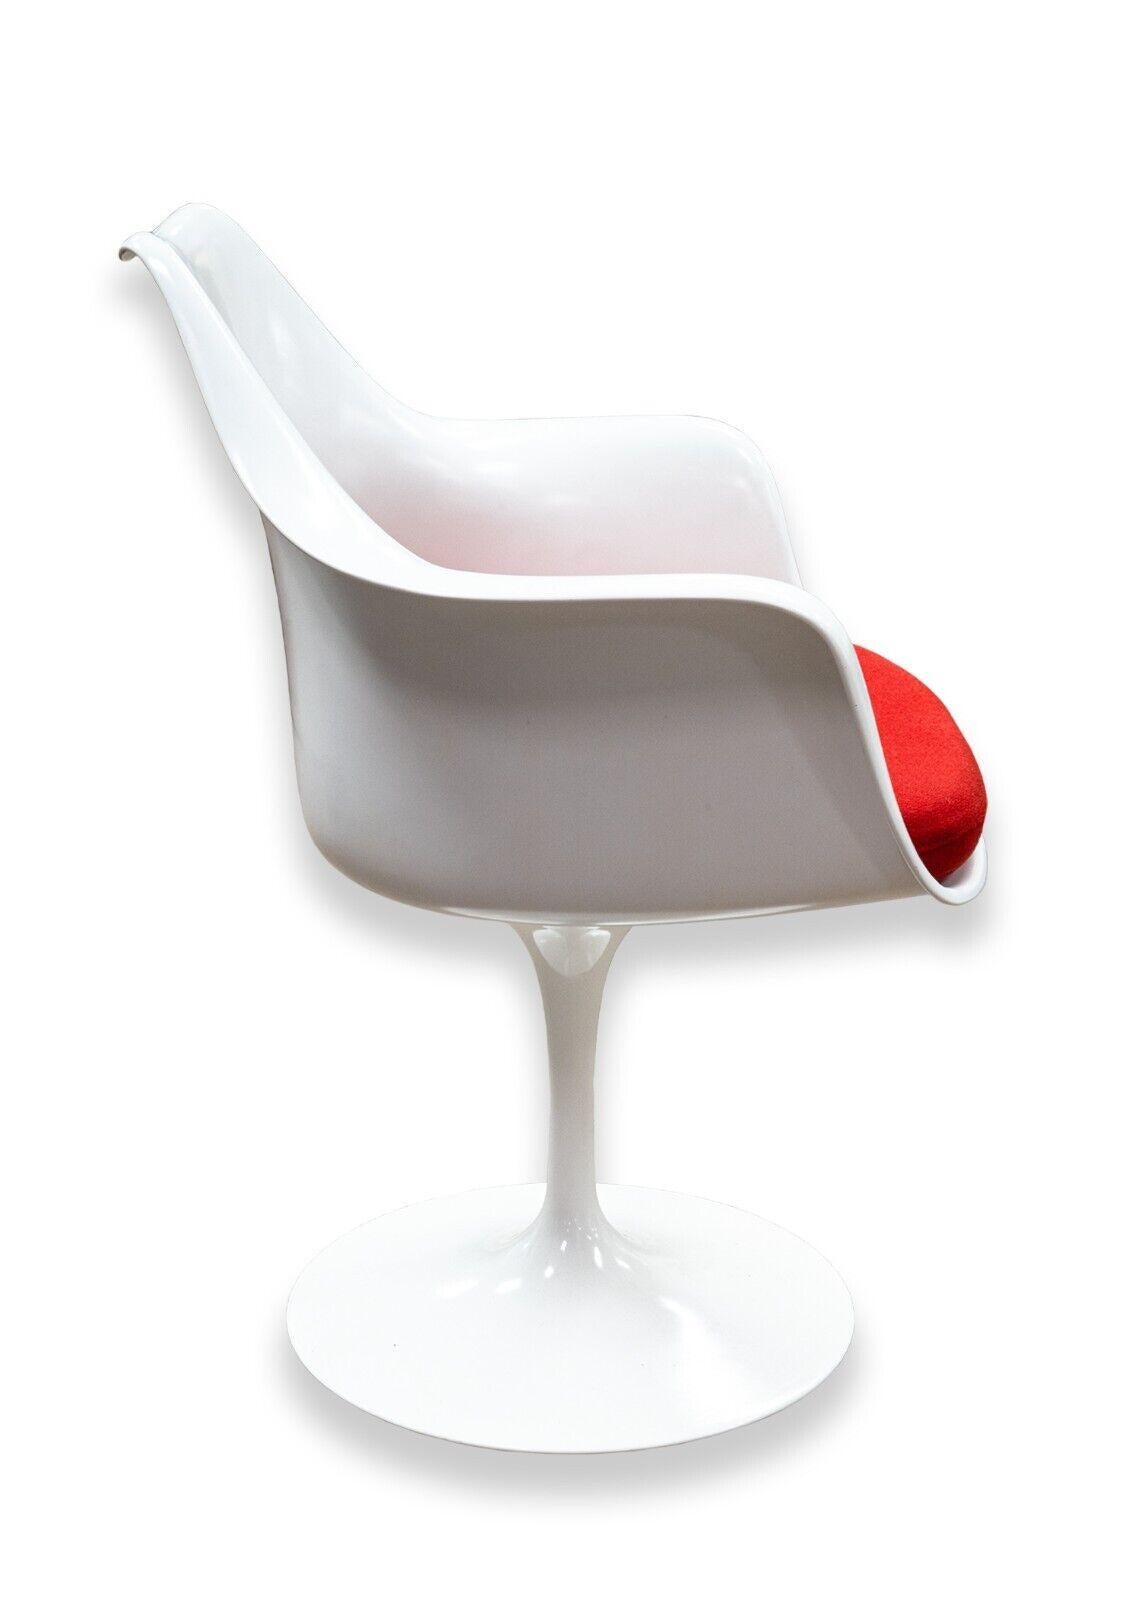 Knoll Saarinen Mid Century Modern White and Red Tulip Dining Chairs 2 Arm 4 Side In Good Condition In Keego Harbor, MI